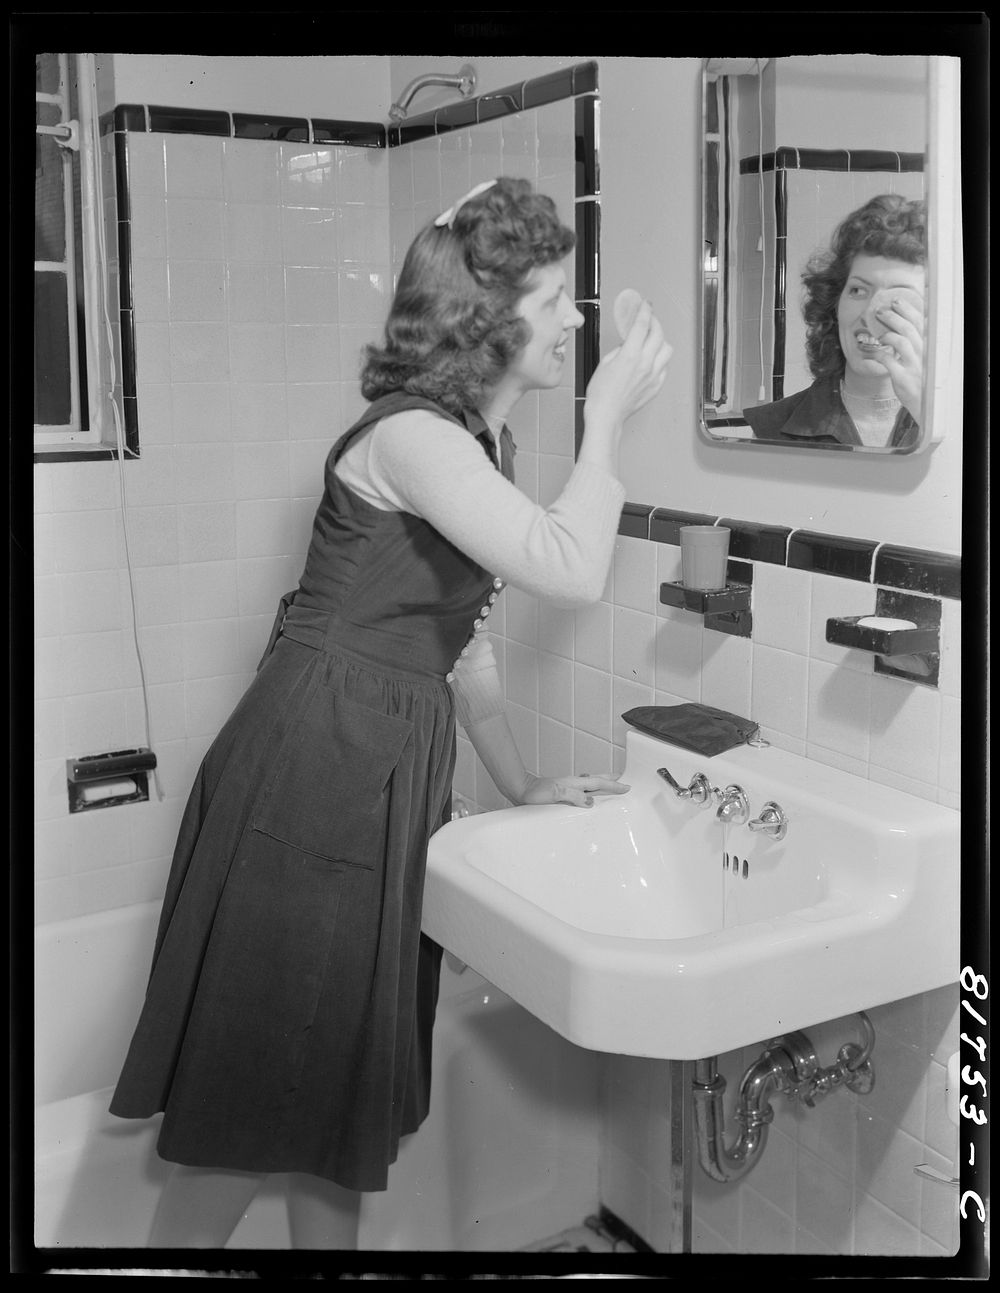 Stenographer has the use of a tiled bathroom in which to powder her nose and wash while she works for the Foreign Function…